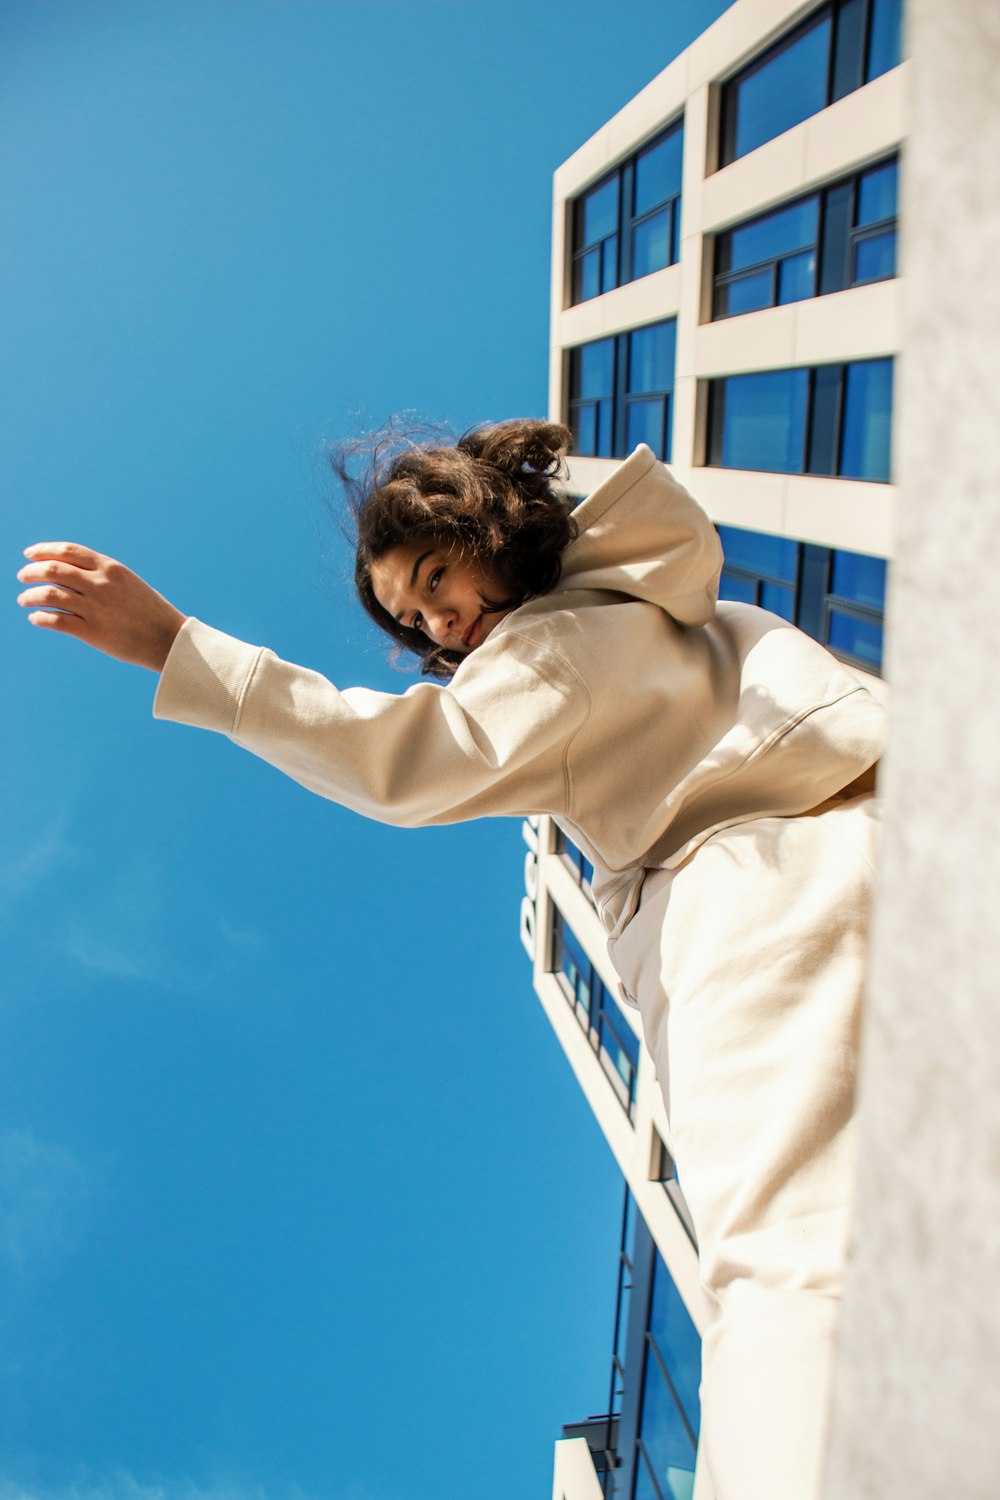 a woman in a white coat is flying through the air